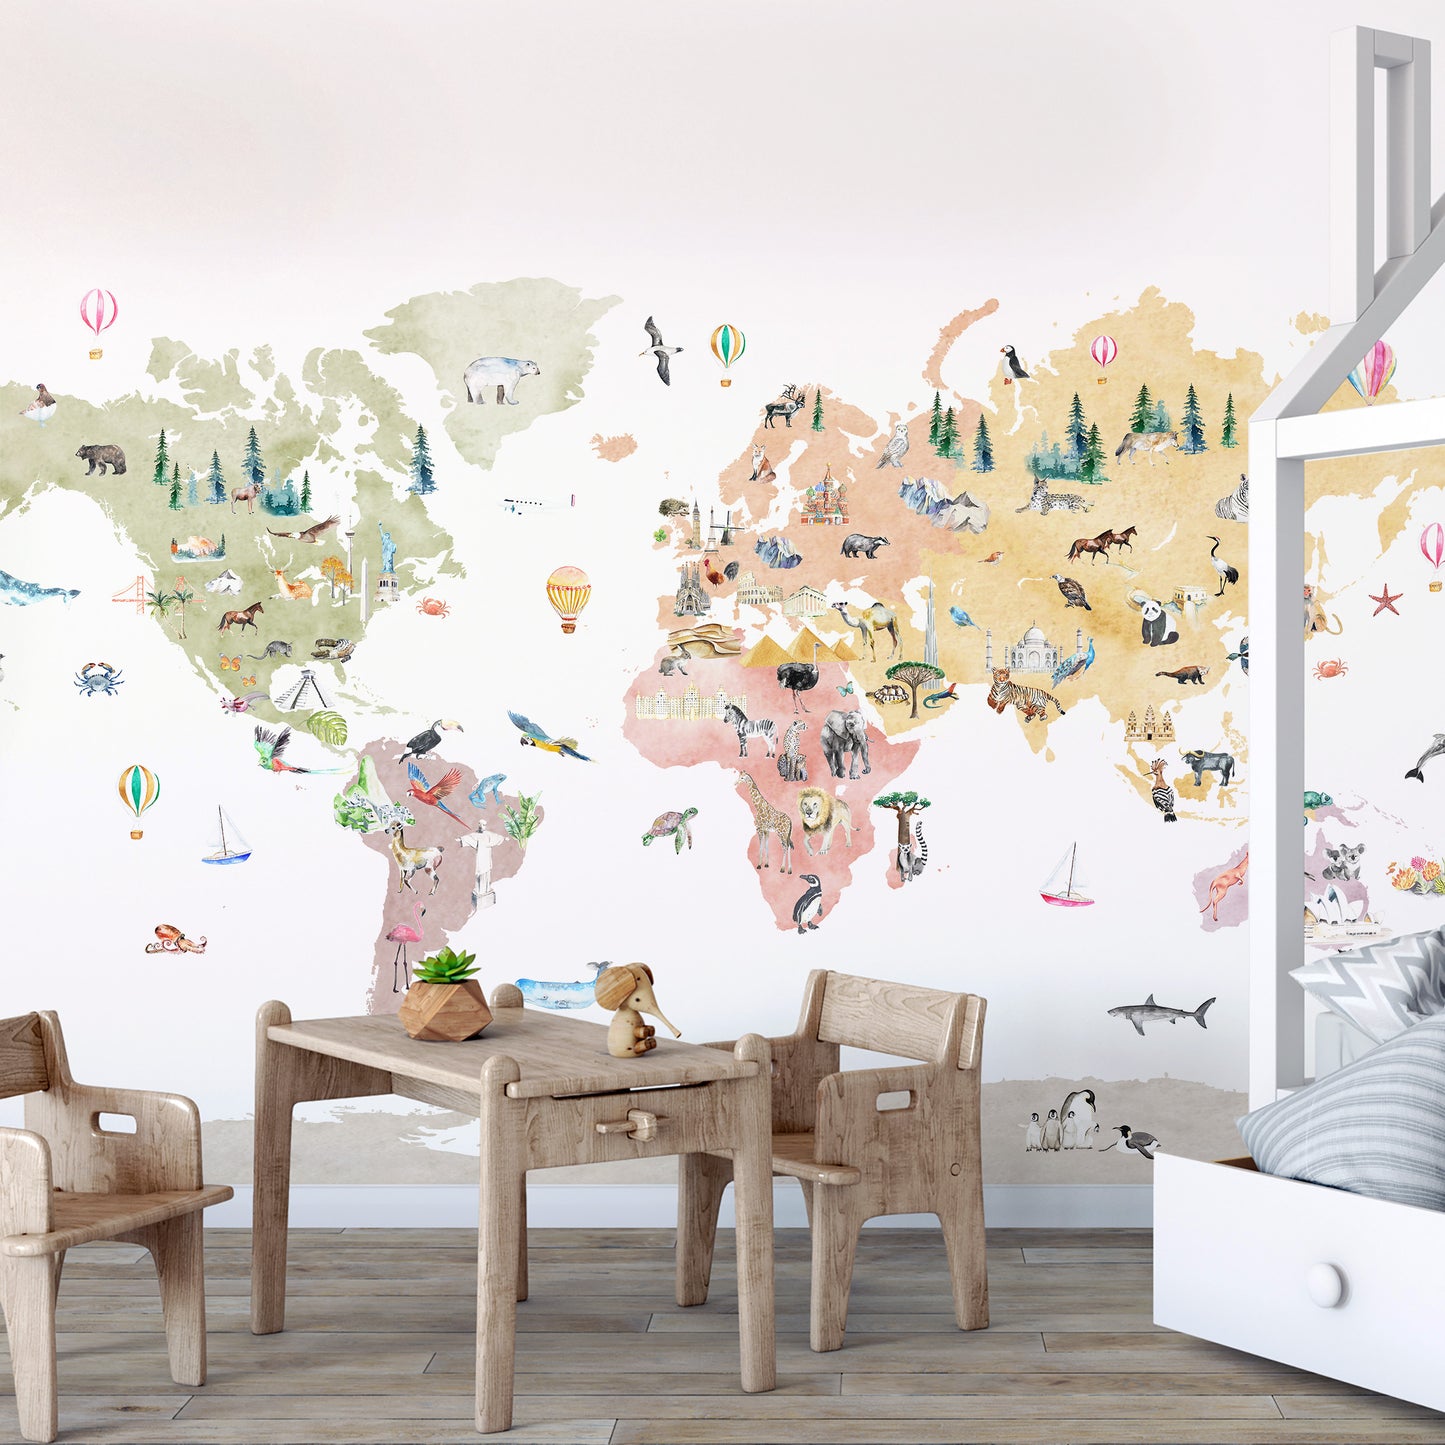 Illustrated Animals World Map Decal